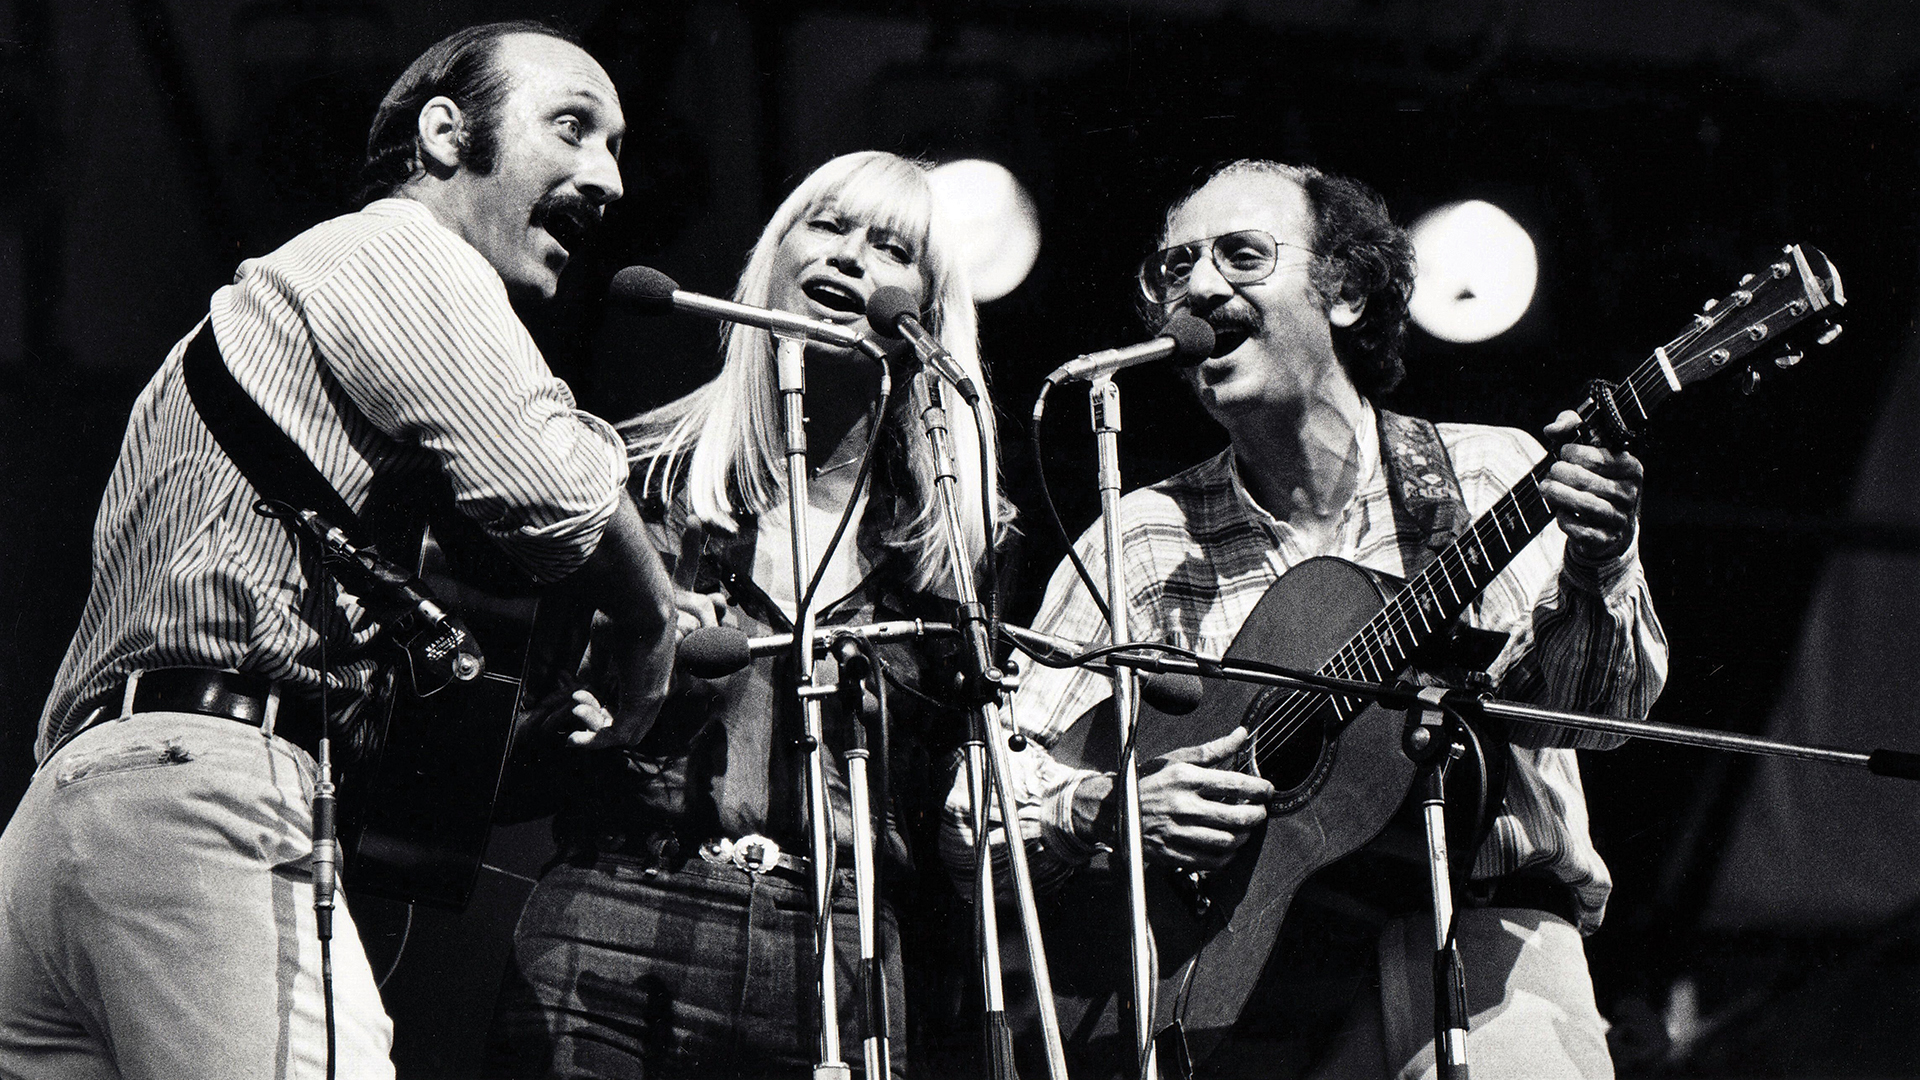 Peter, Paul and Mary around microphones